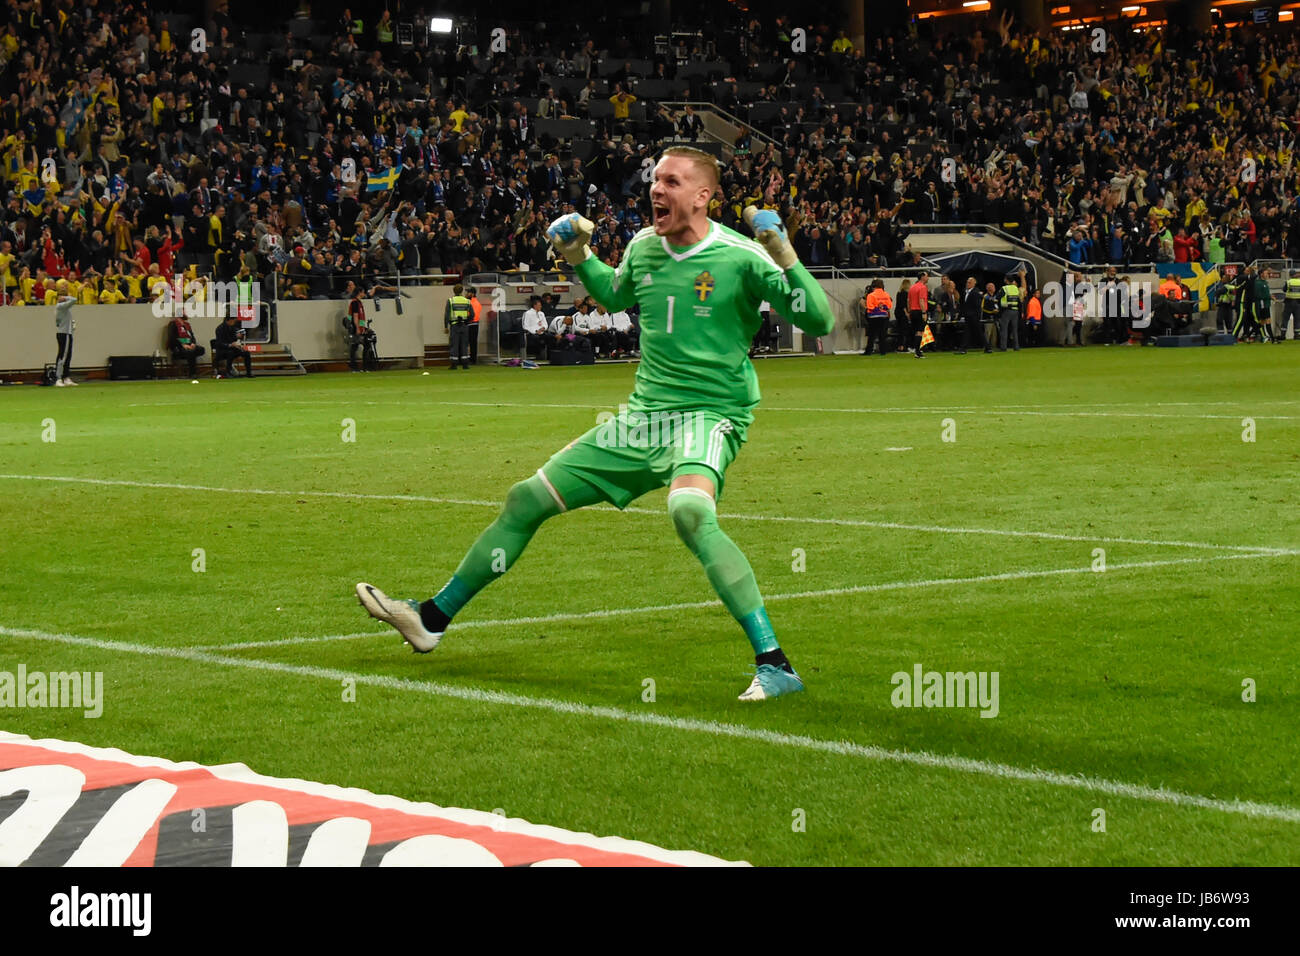 Stockholm, Sweden. 9th june, 2017. Sweden goalkeeper 1 Robin Olsen Cheering happy after victory goal in the FIFA World Cup™ Qualifiers game between Sweden and France. Credit: Bror Persson/Frilansfotograferna/Alamy Live News Stock Photo